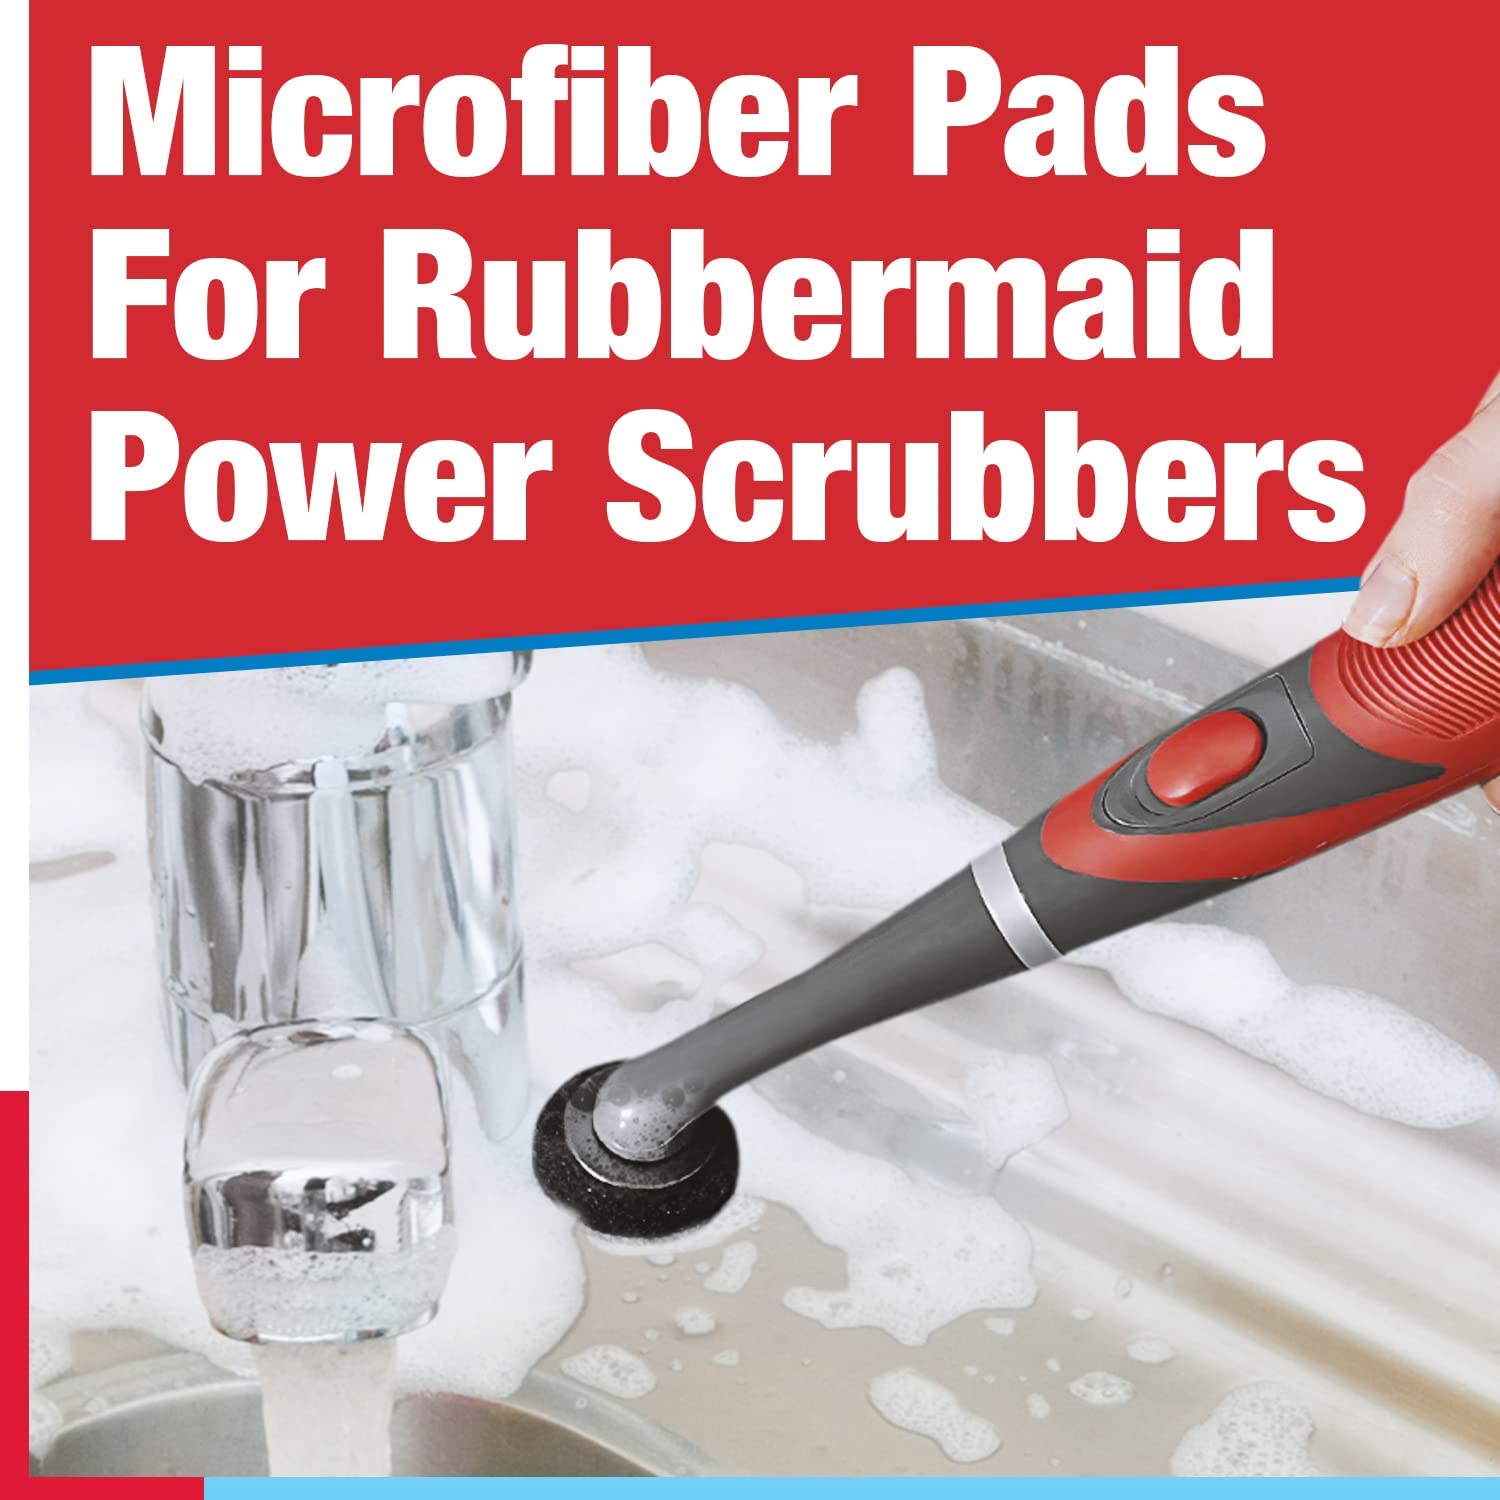 Rubbermaid Power Scrubber: Can this 'scrubbing toothbrush' really clean  every surface?